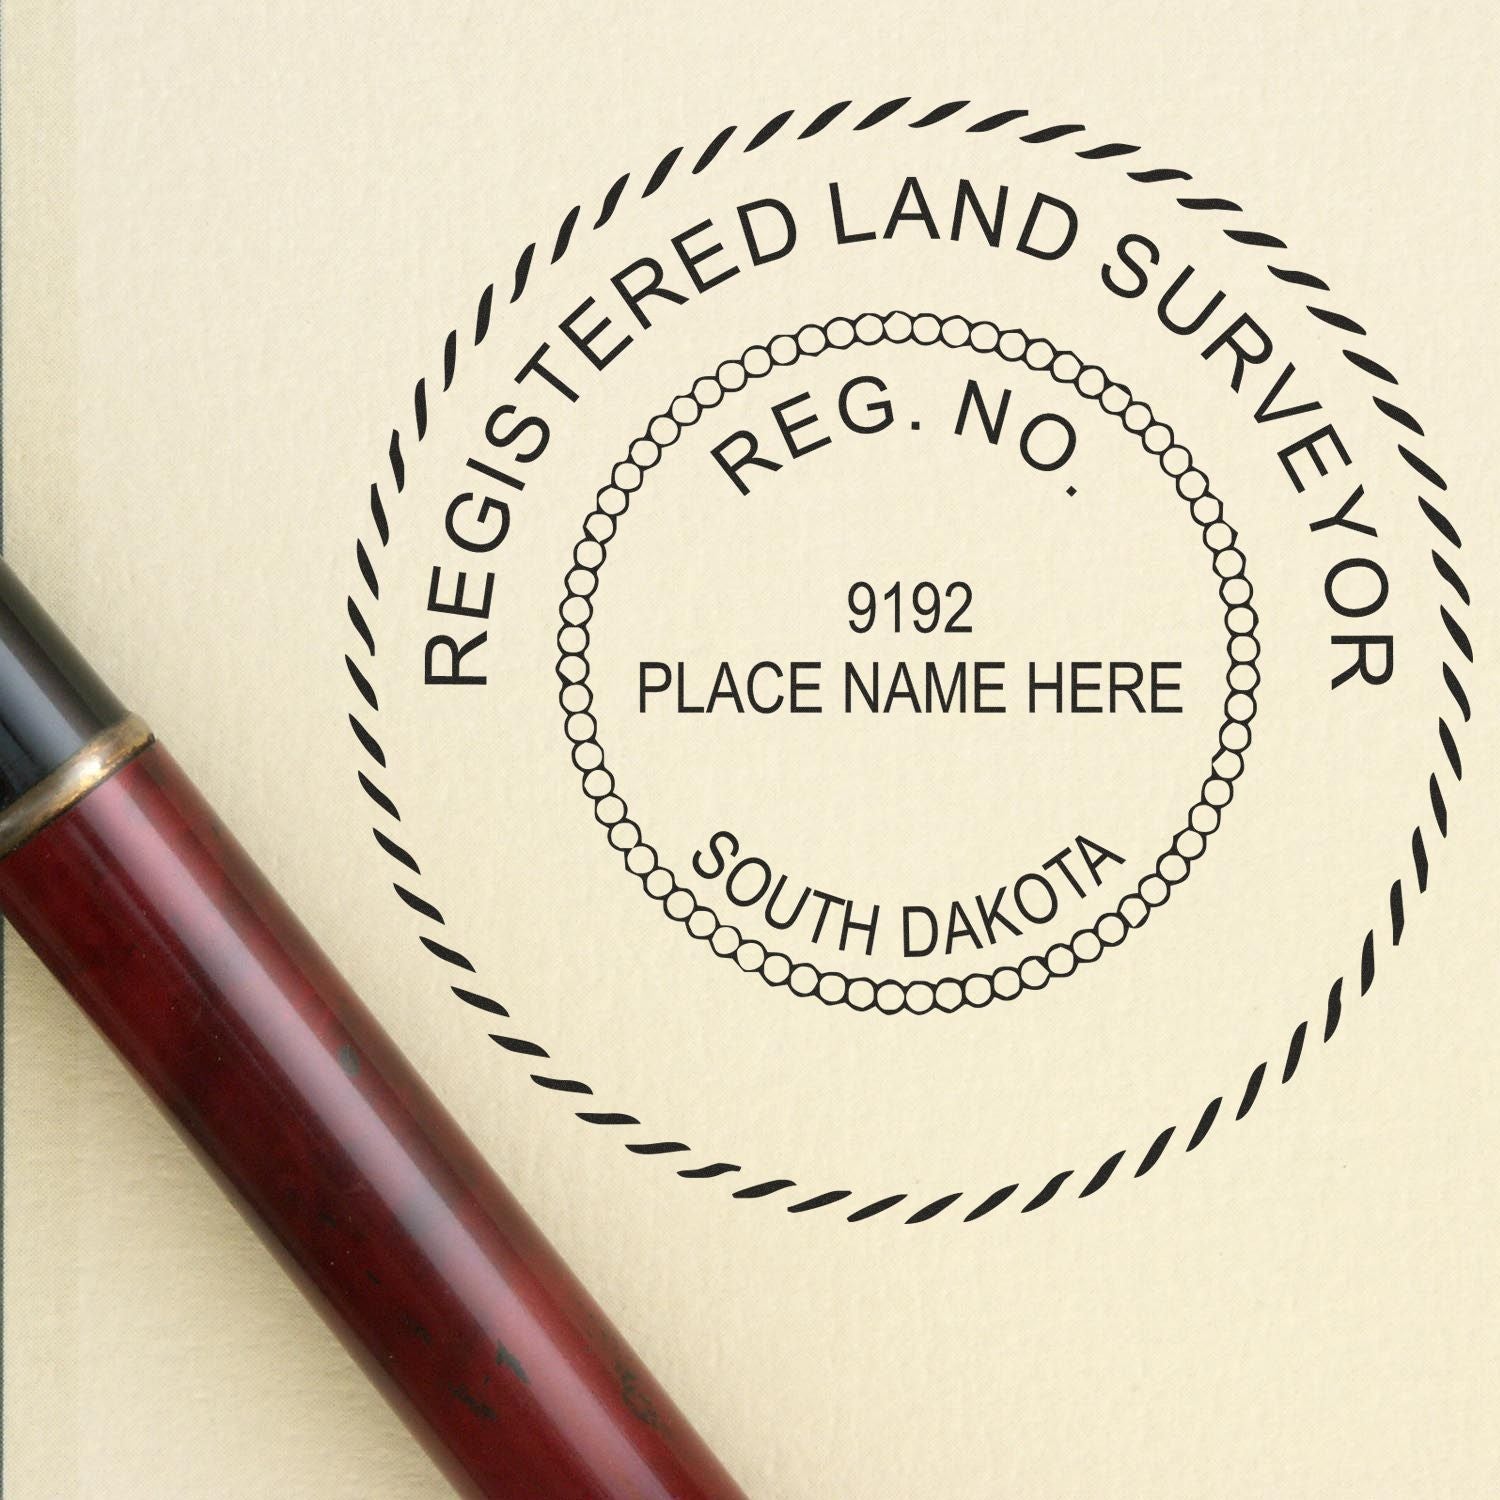 South Dakota Land Surveyors Must-Have: The Professional Stamp Unraveled Feature Image